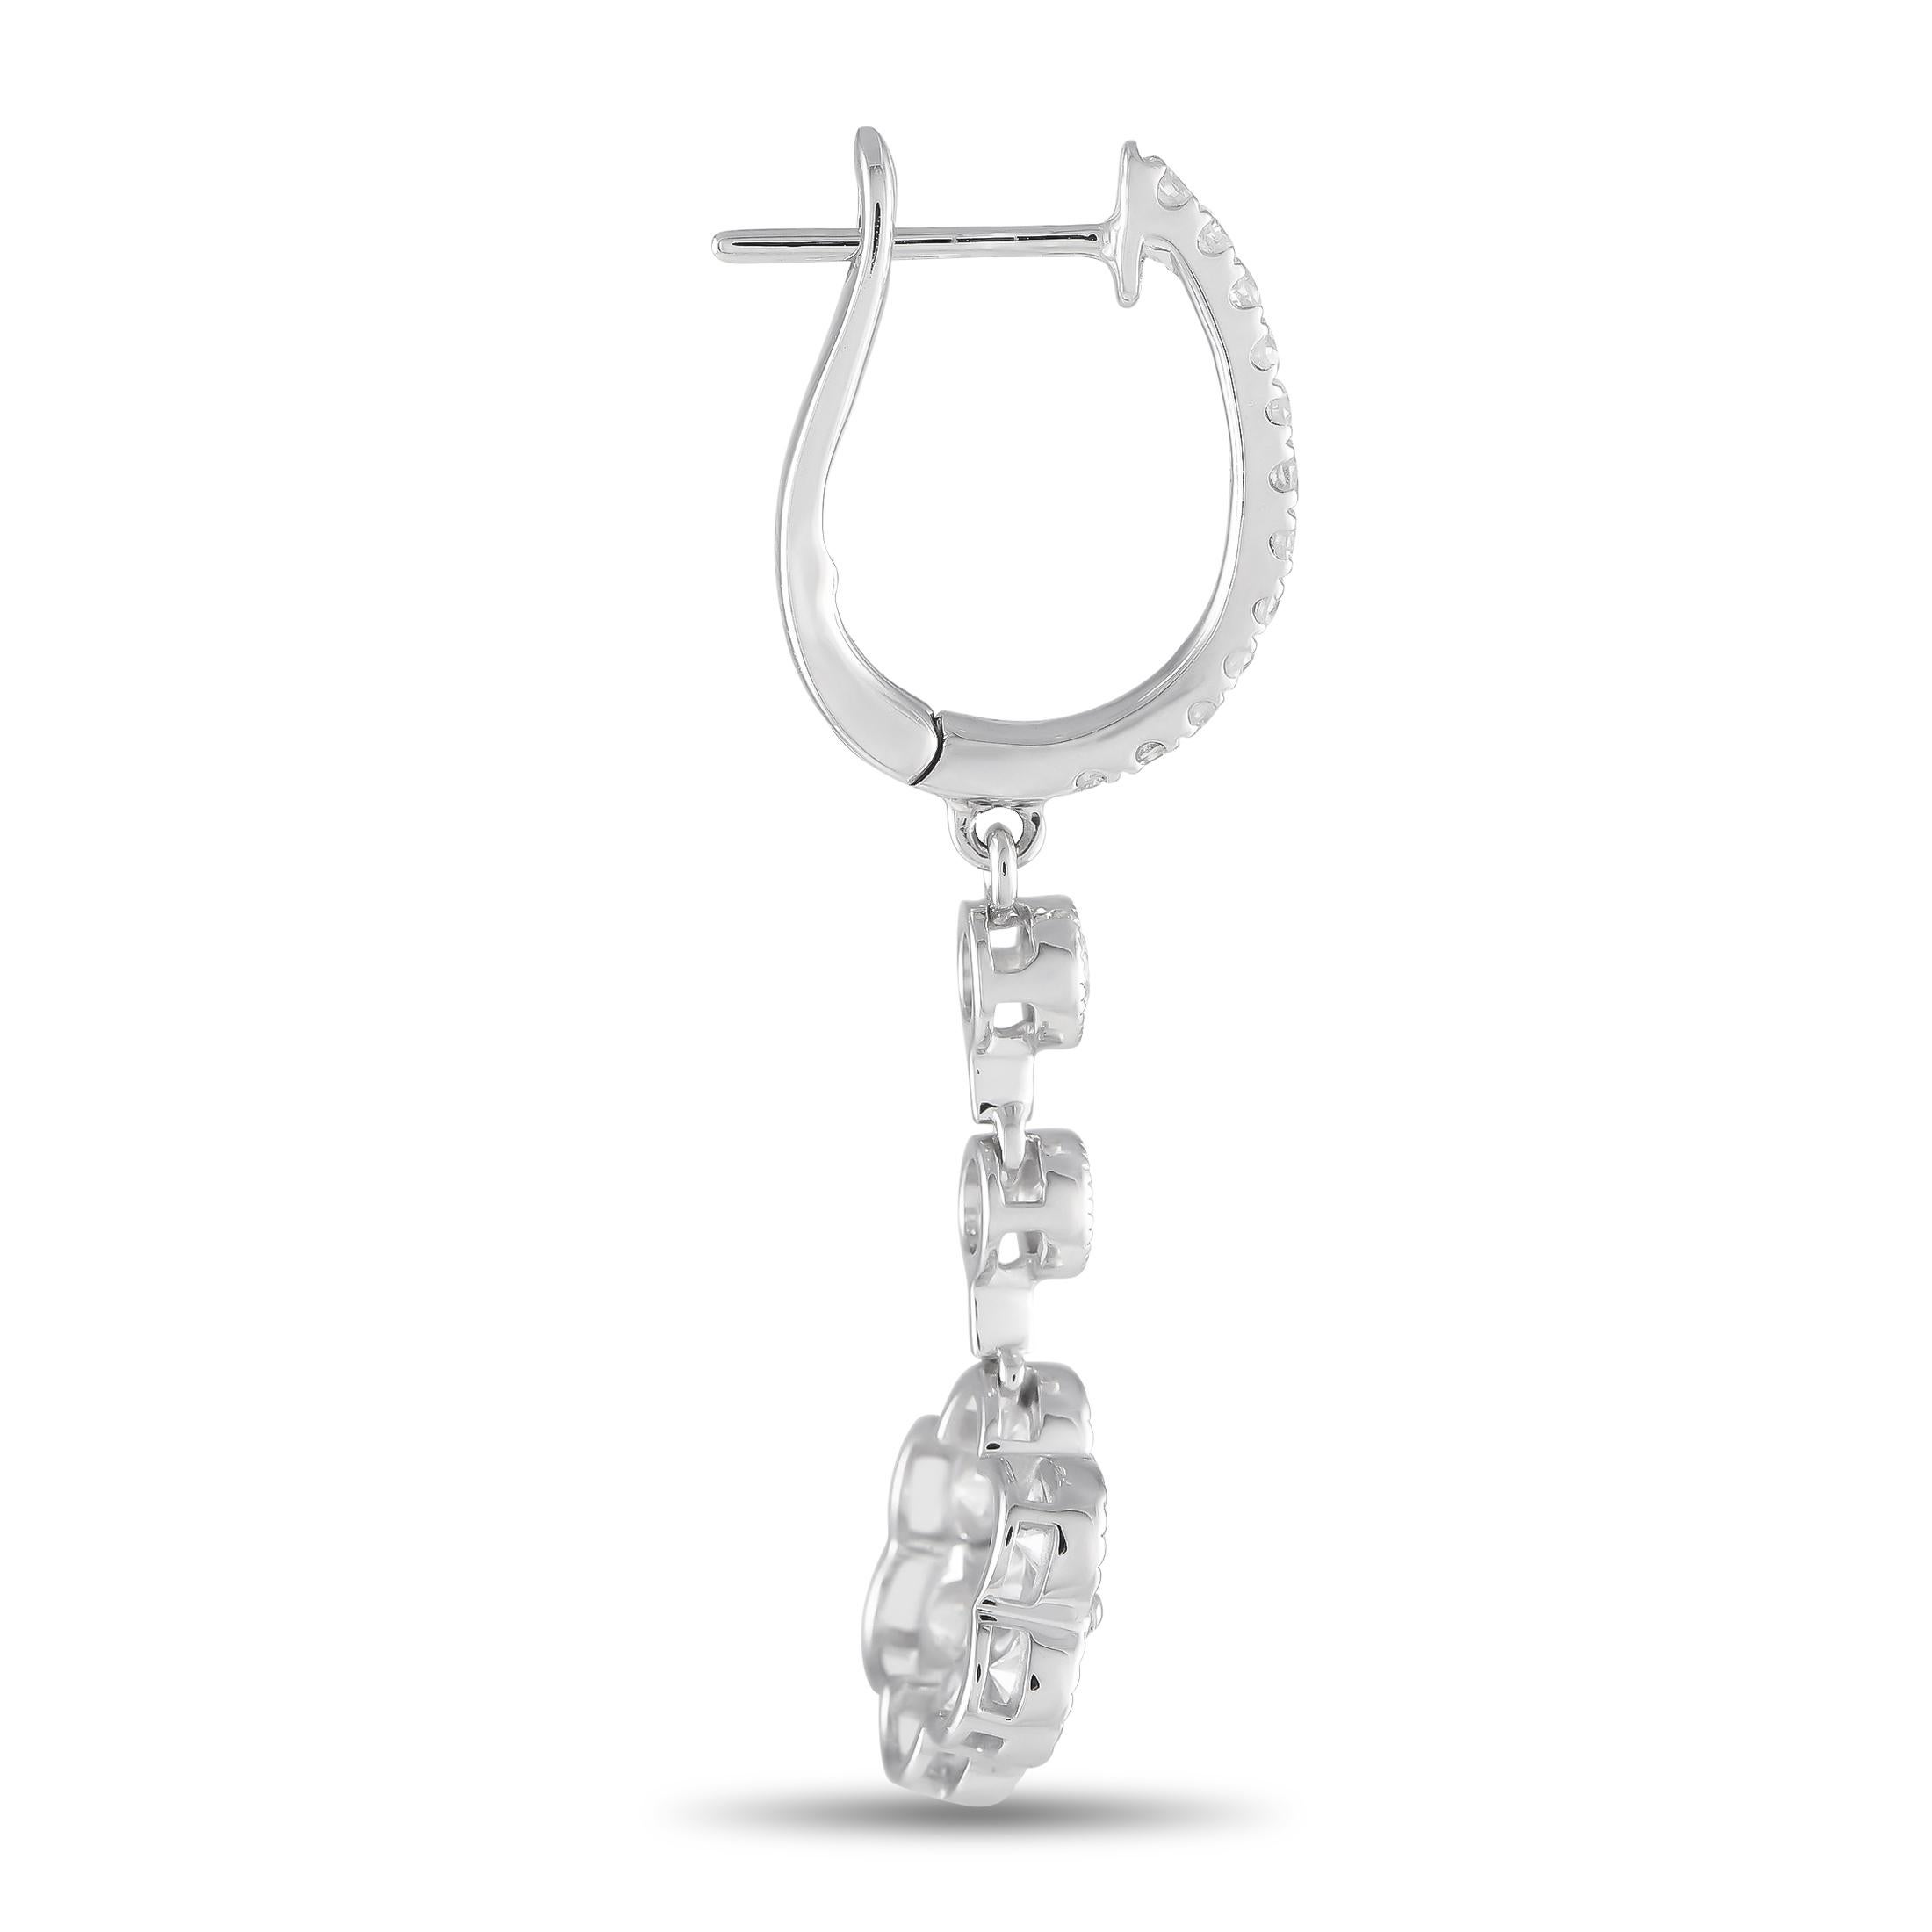 Sparkling Diamonds with a total weight of 1.73 carats and delicate floral motifs make these earrings an elegant addition to any ensemble. Crafted from 18K white gold, each one measures 1.45 long by 0.45 wide.This jewelry piece is offered in brand